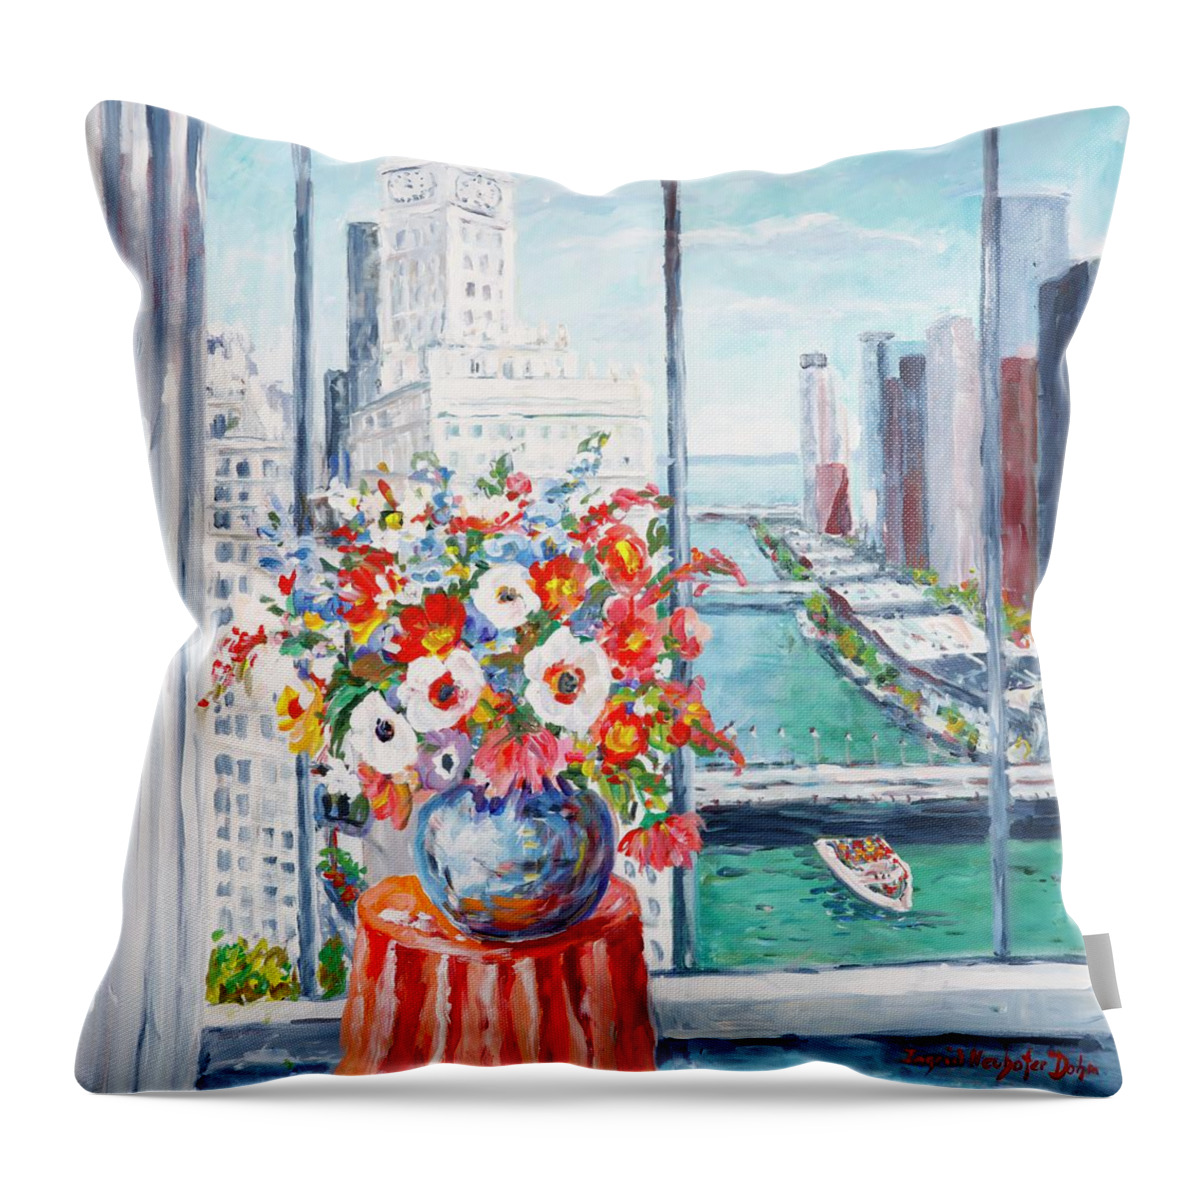 Flowers Throw Pillow featuring the painting Chicago River by Ingrid Dohm